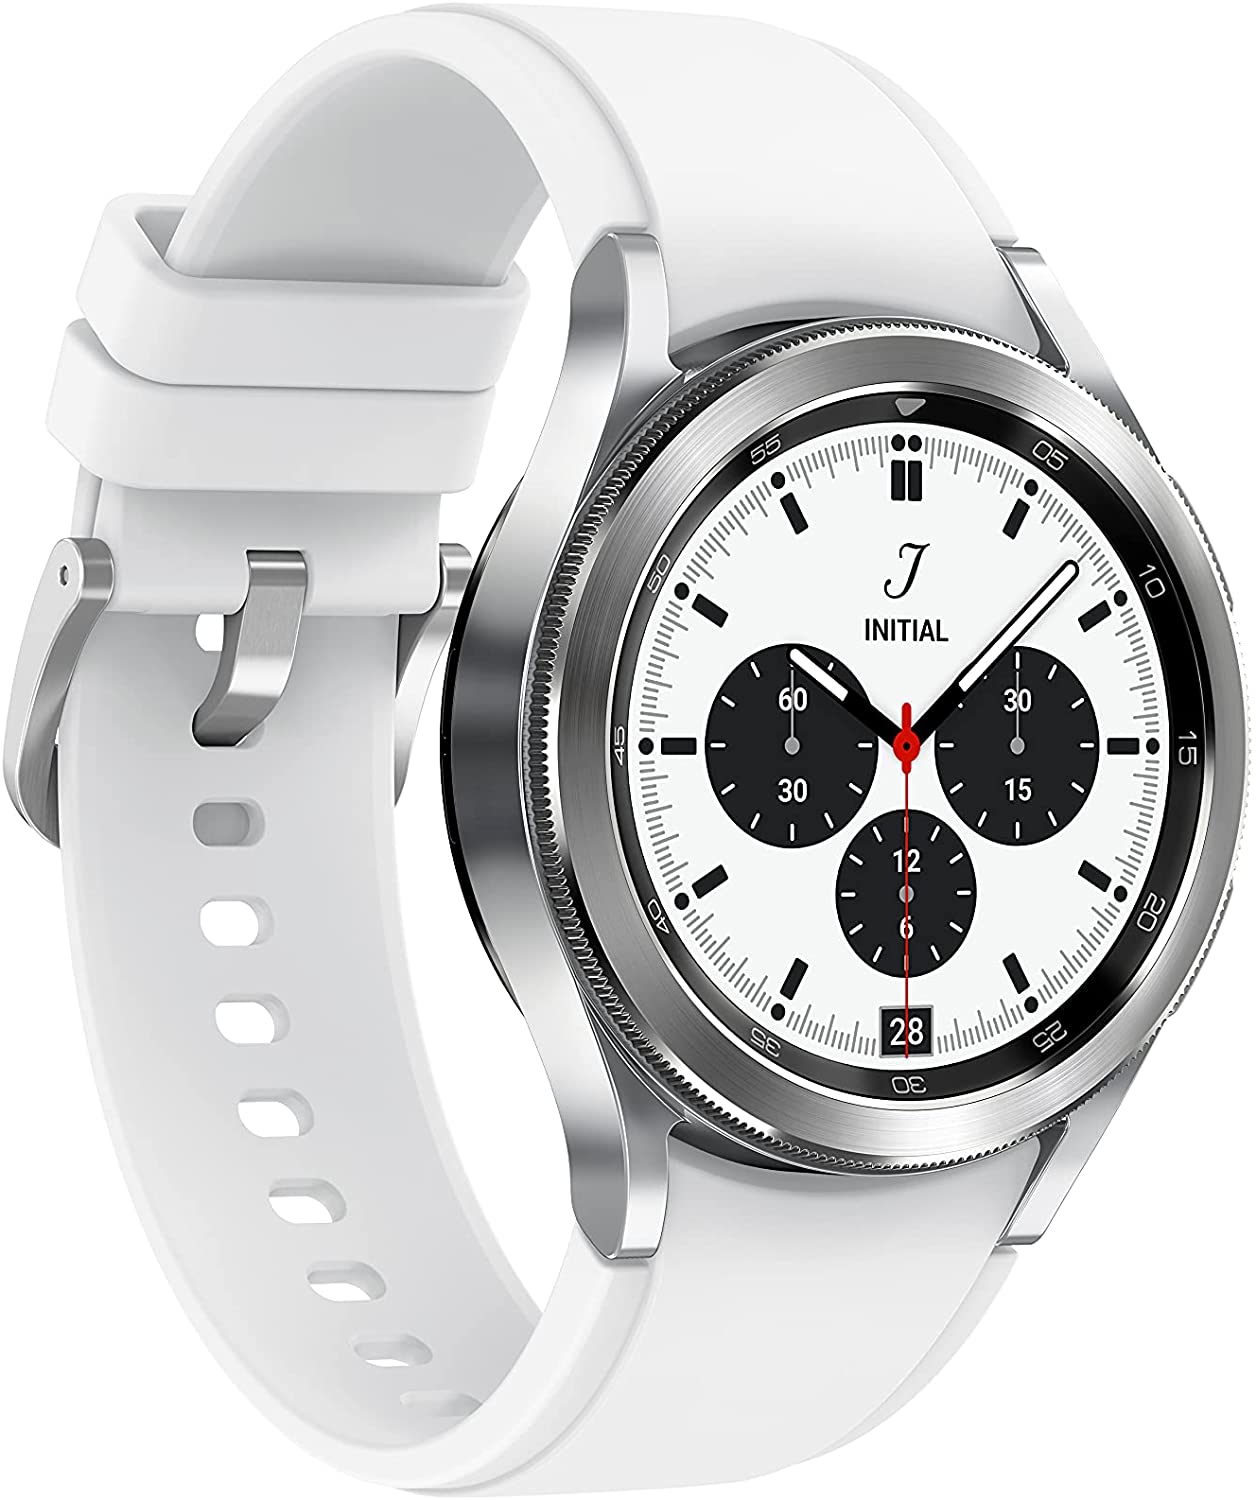 Samsung Galaxy Watch 4 Price, Pros Classic Wrist - (46mm) Features, Geeky Cons and Specifications, Full (LTE)